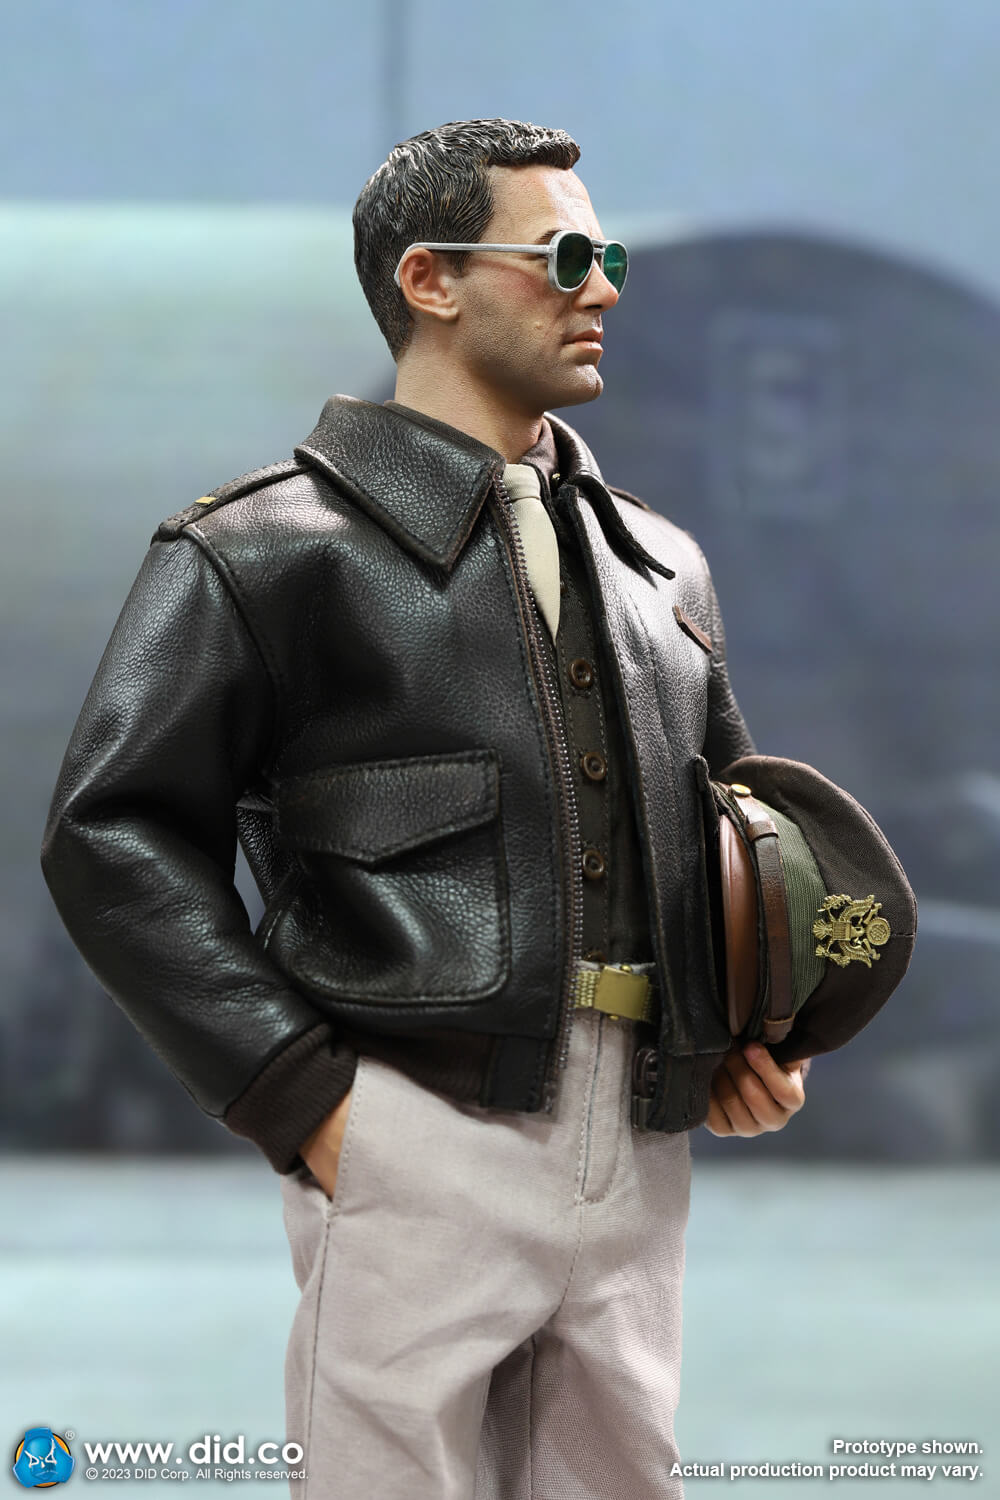 NEW PRODUCT: DiD: A80167 WWII United States Army Air Forces Pilot – Captain Rafe 2720